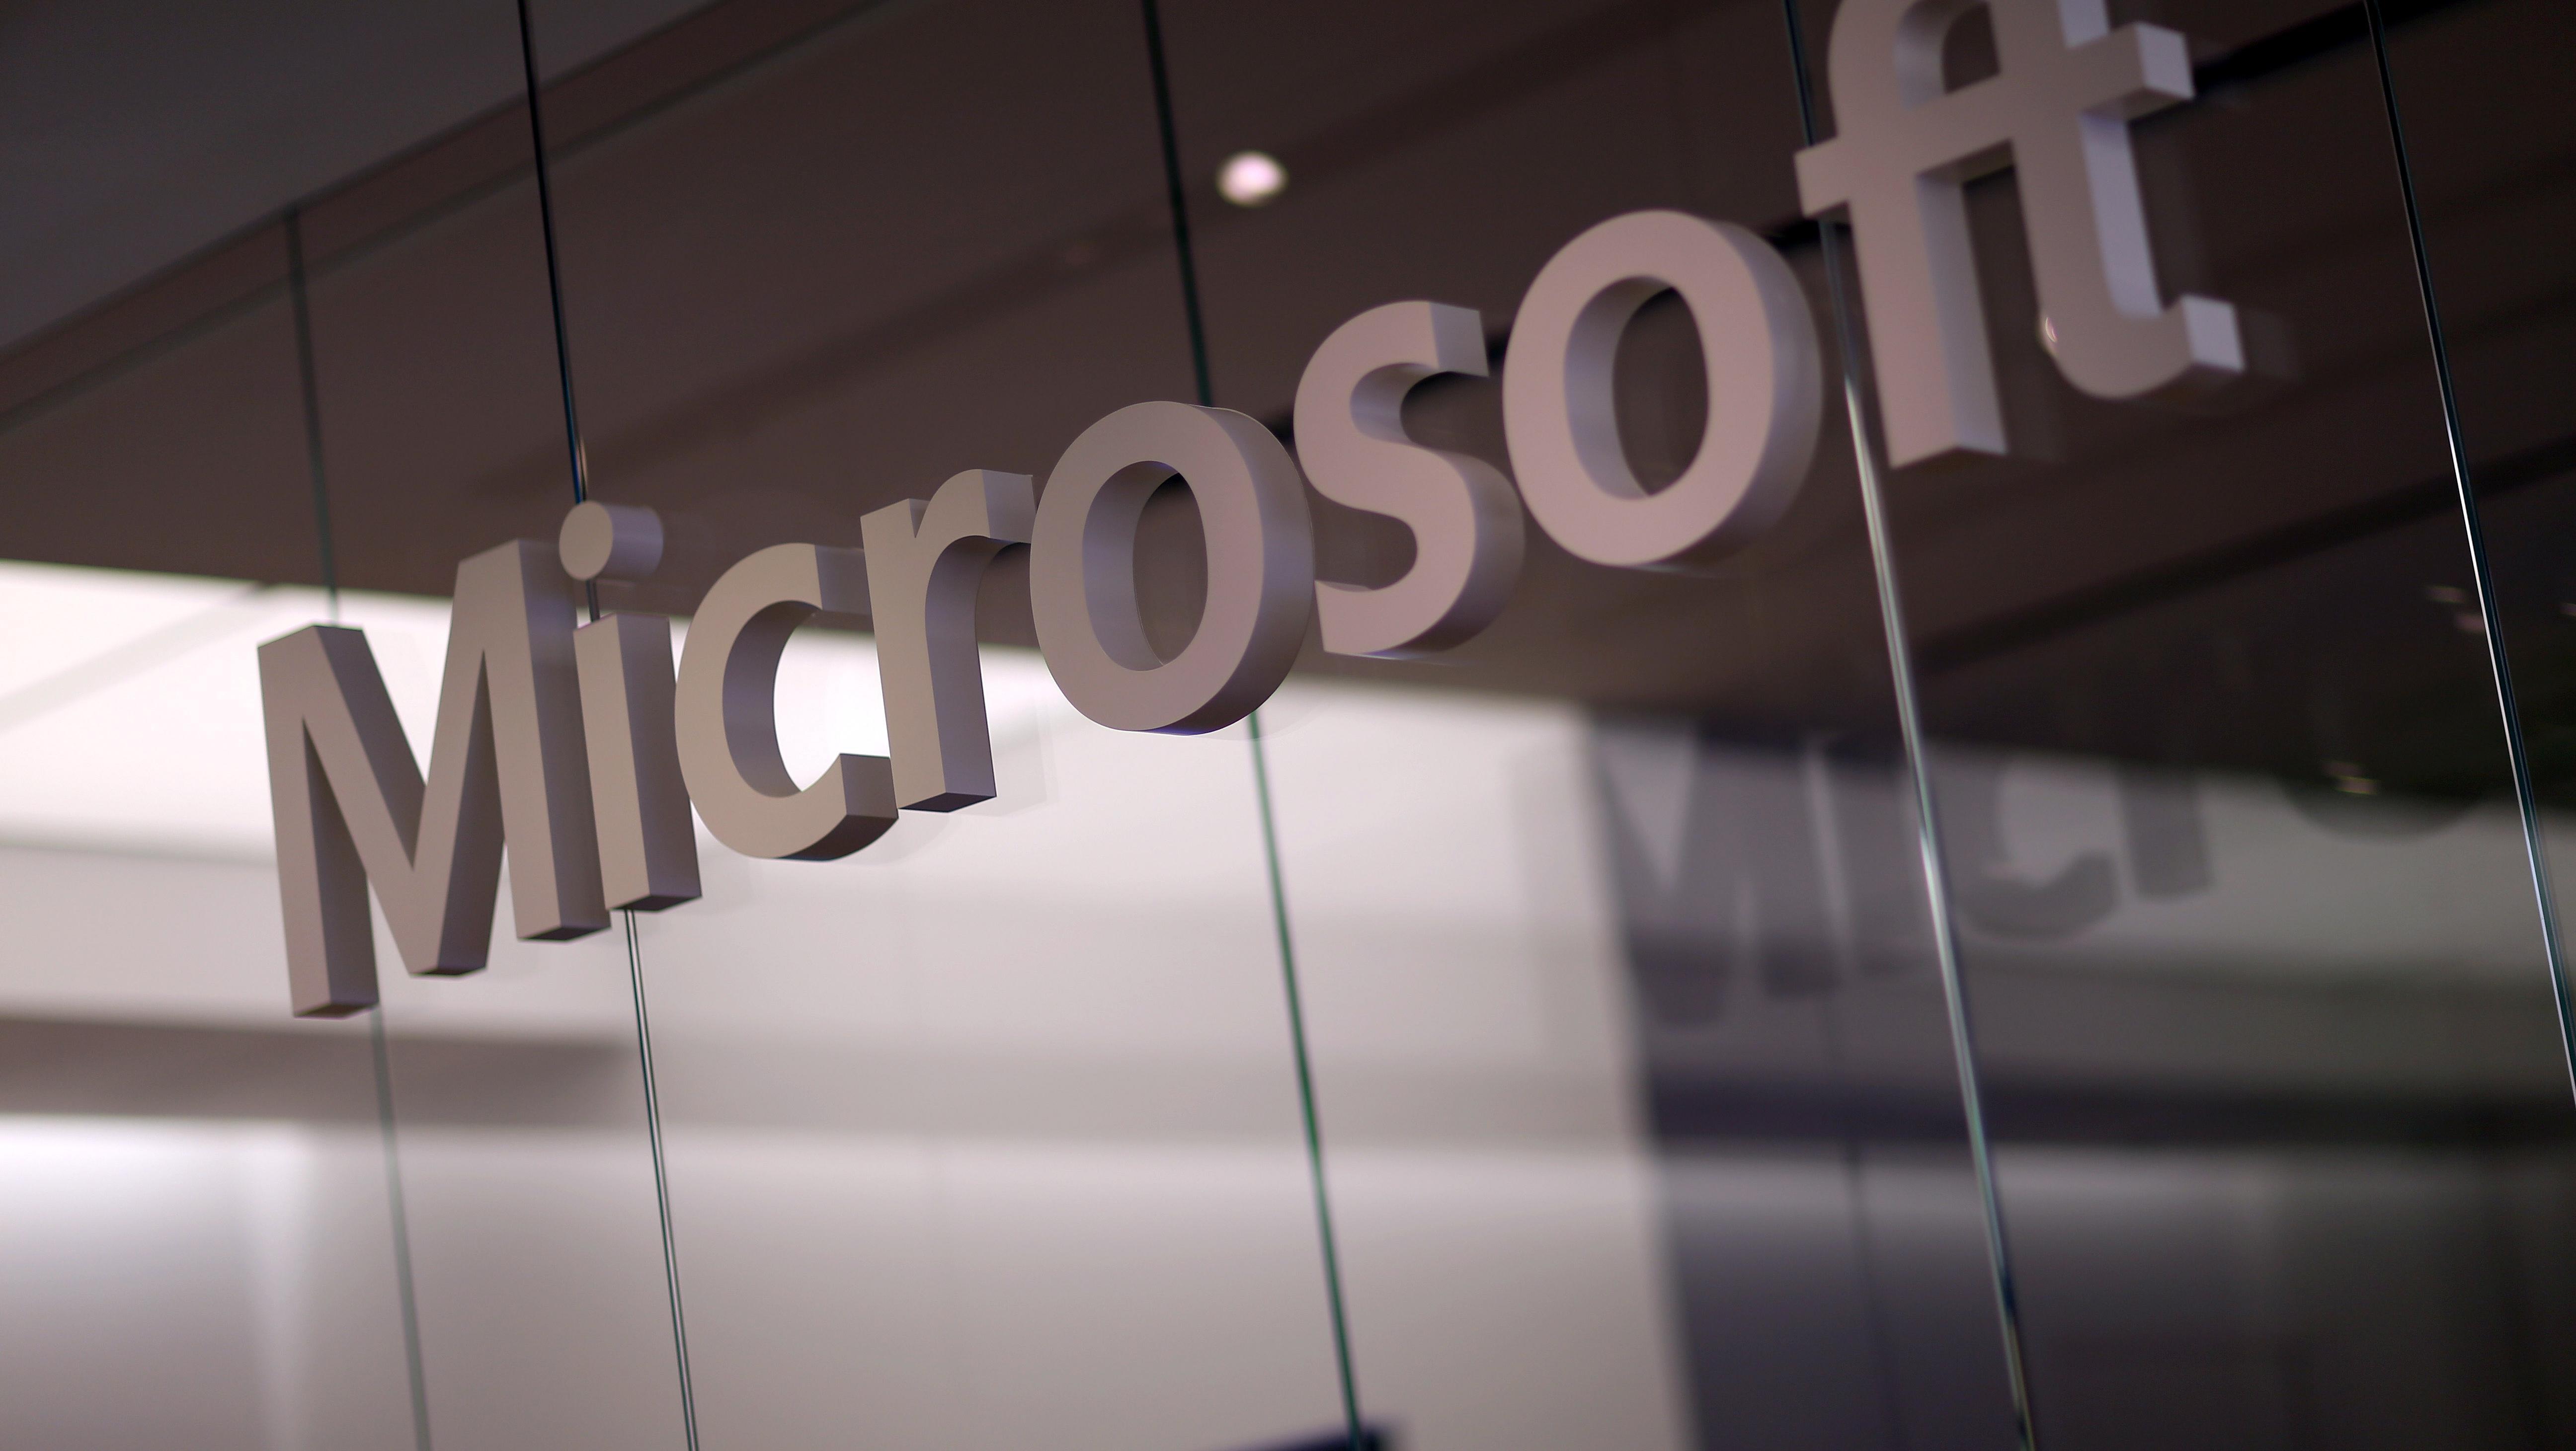 Microsoft laid off 10 thousand employees, this is the severance pay